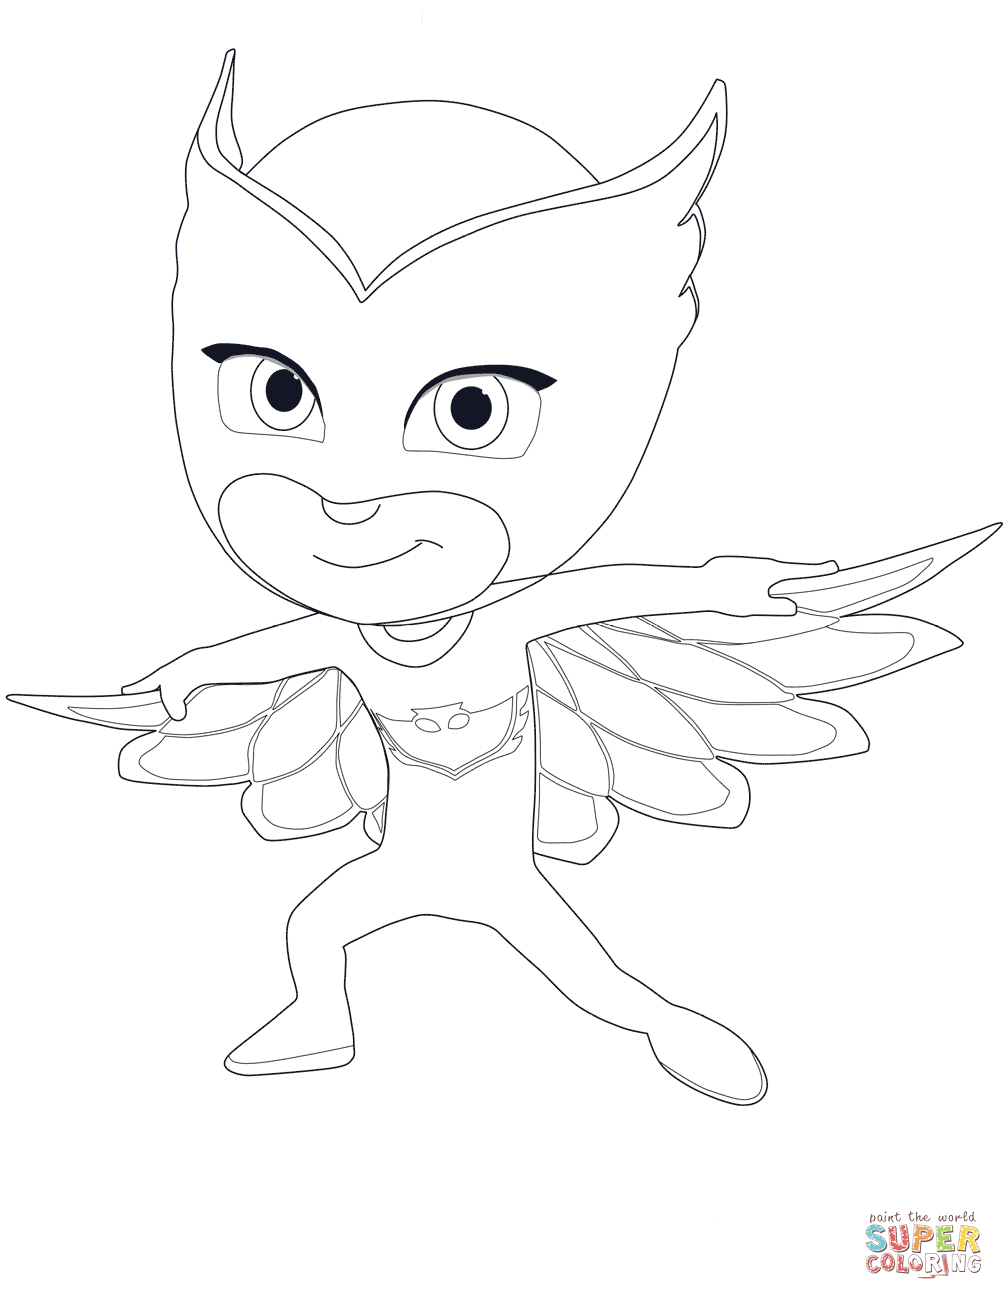 Owlette from PJ Masks coloring page | Free Printable Coloring Pages